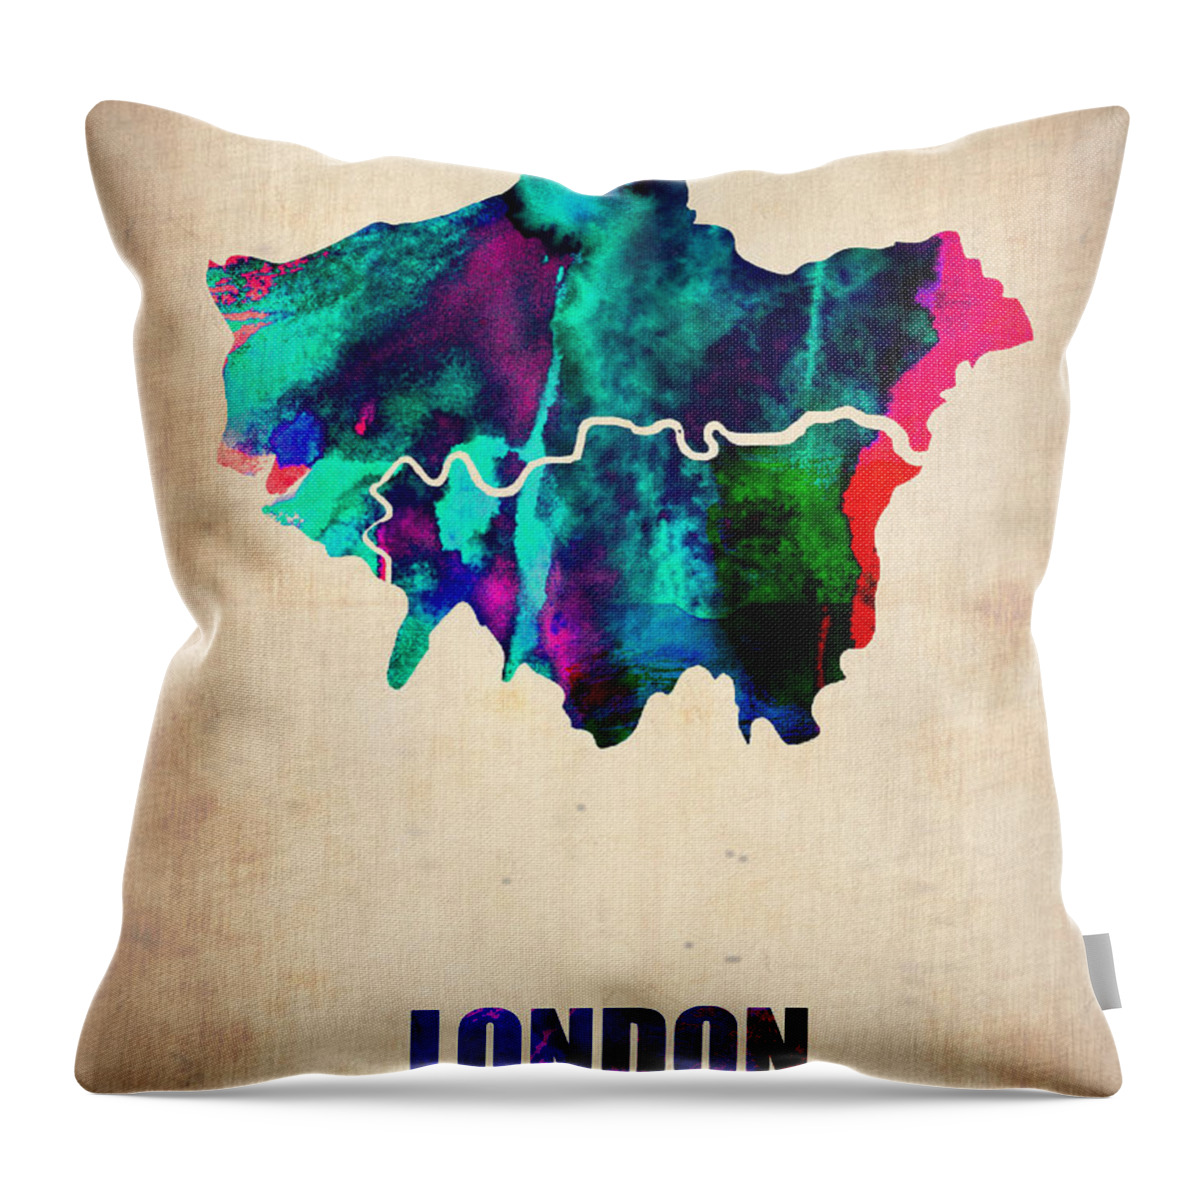 London Throw Pillow featuring the painting London Watercolor Map 2 by Naxart Studio